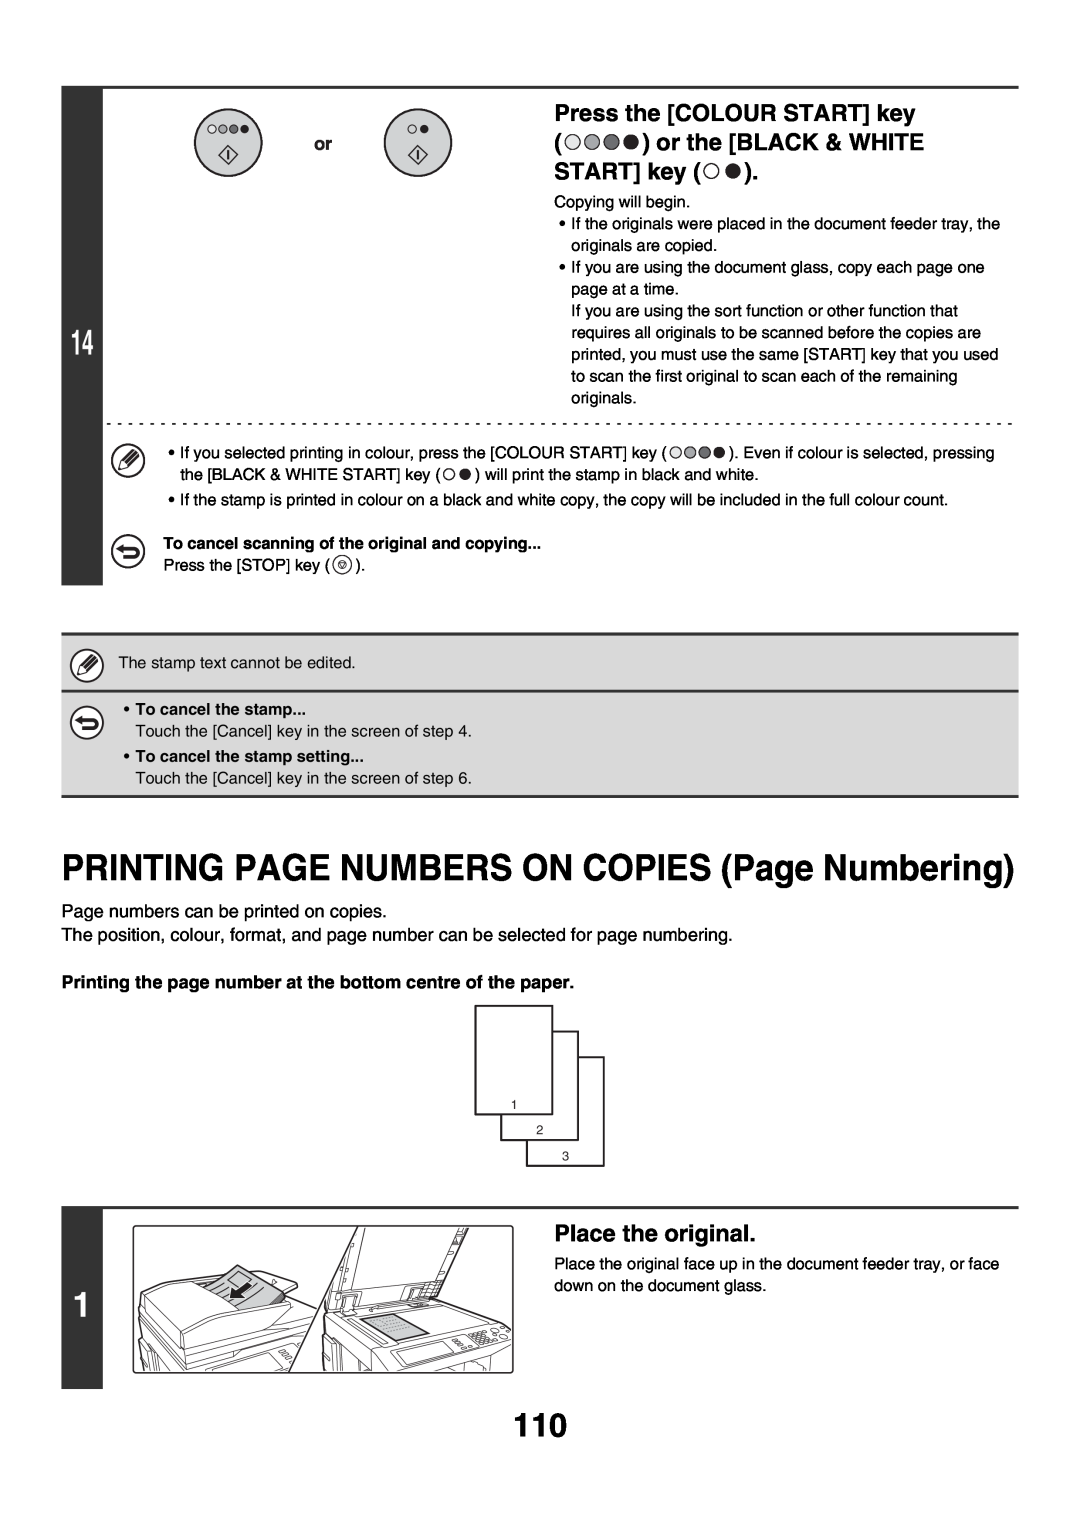 Sharp MX-4500N, MX-4501N PRINTING PAGE NUMBERS ON COPIES Page Numbering, Press the COLOUR START key, or the BLACK & WHITE 